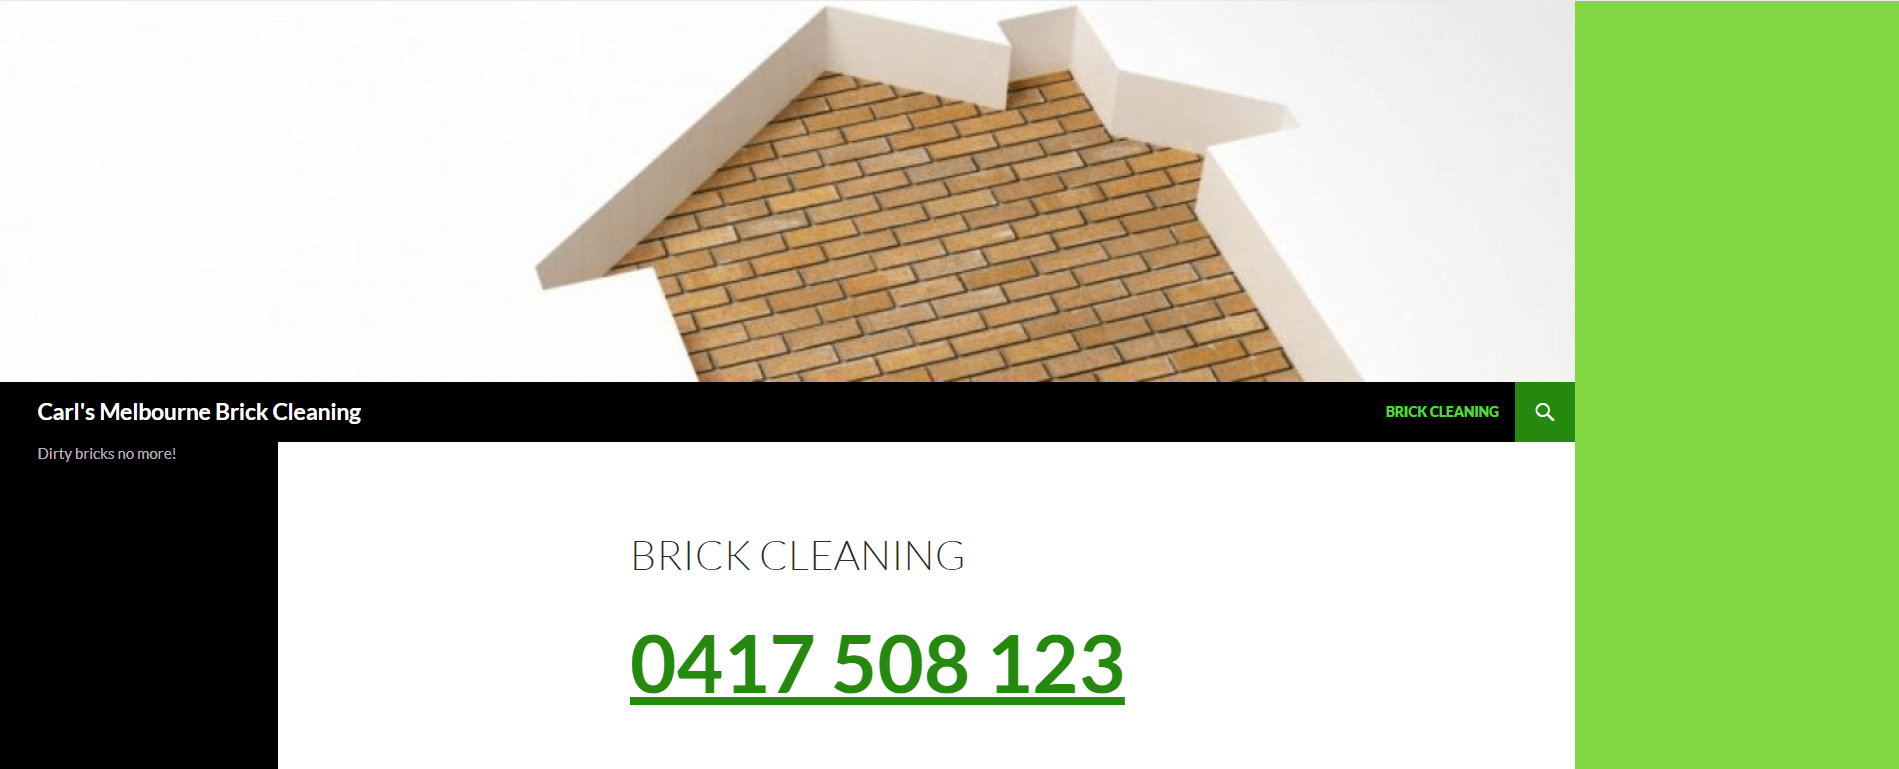 12Carl's Melbourne Brick Cleaning